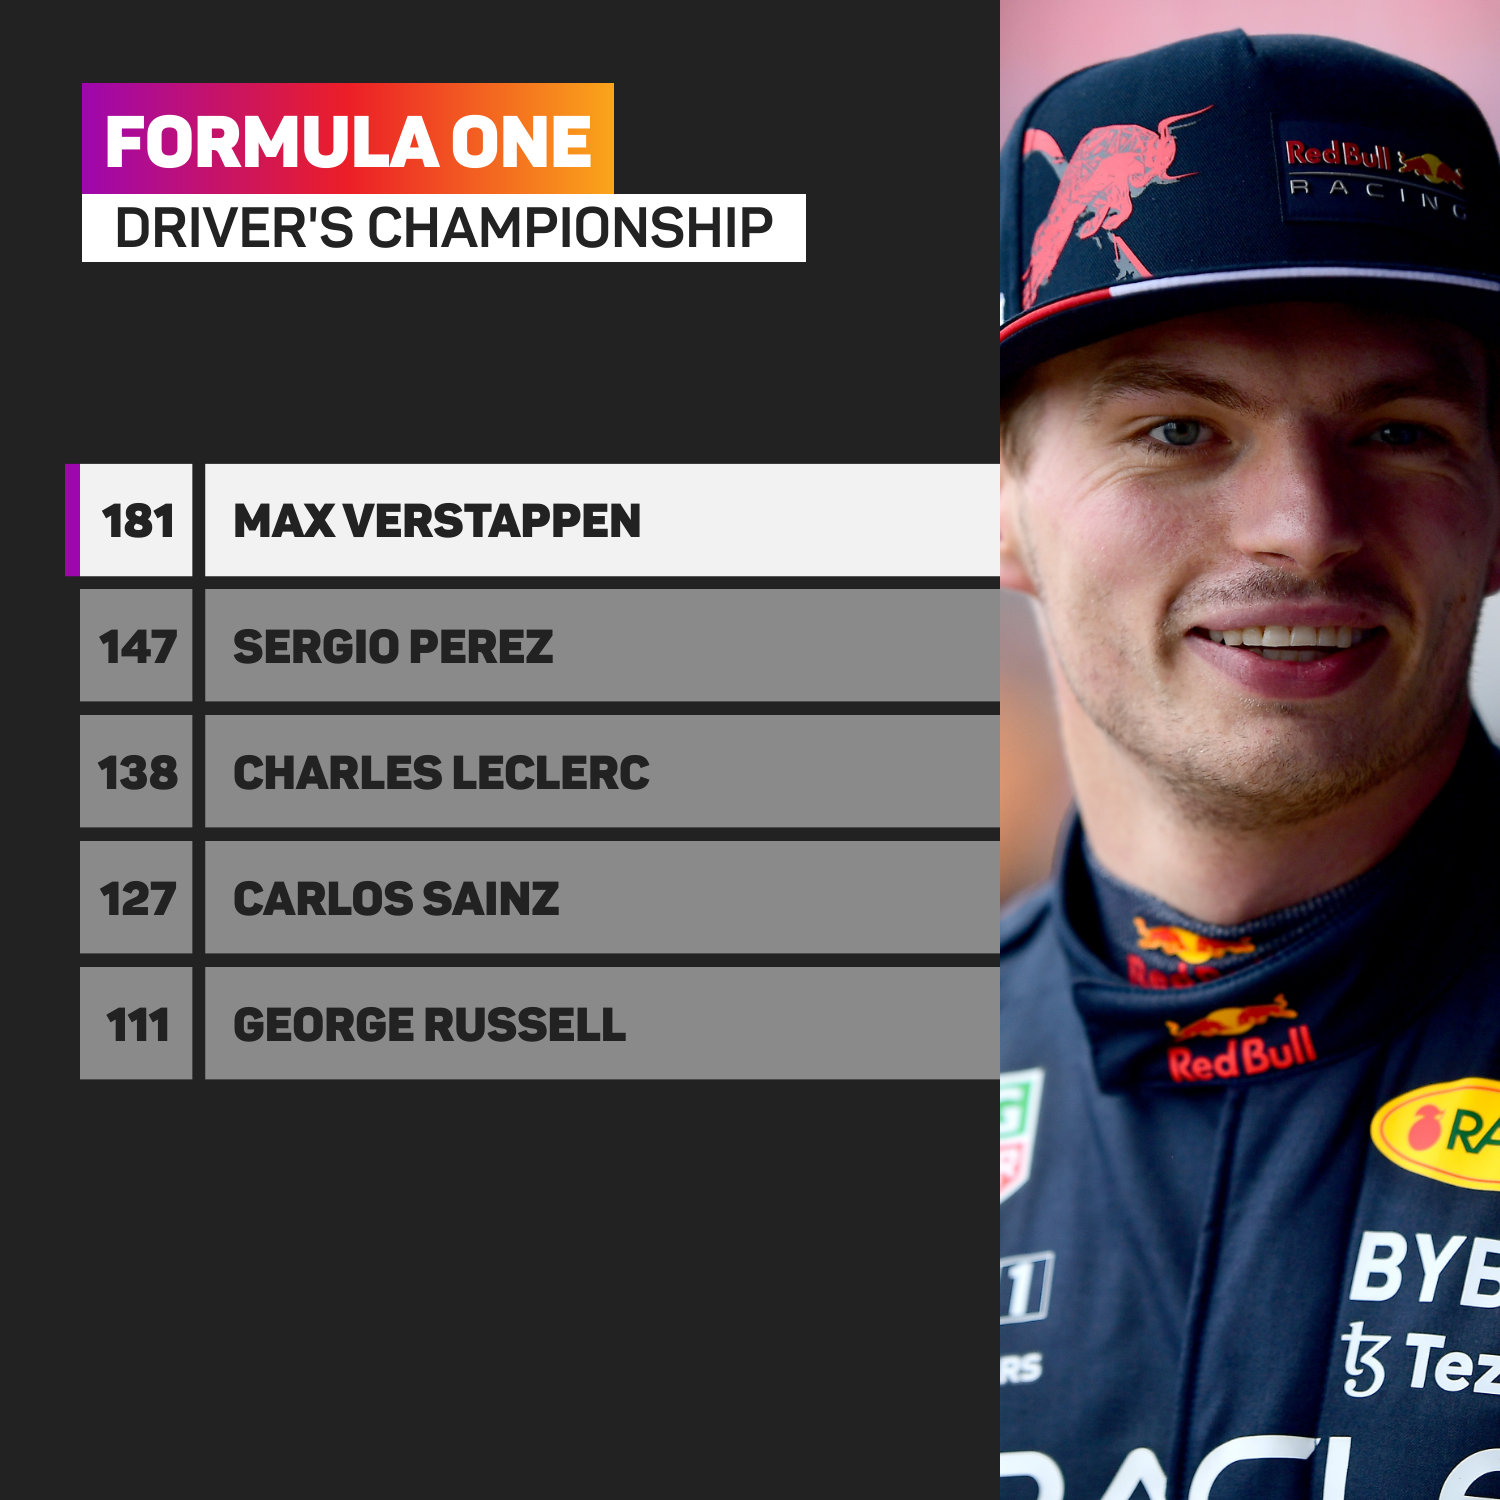 Max Verstappen leads the driver's championship